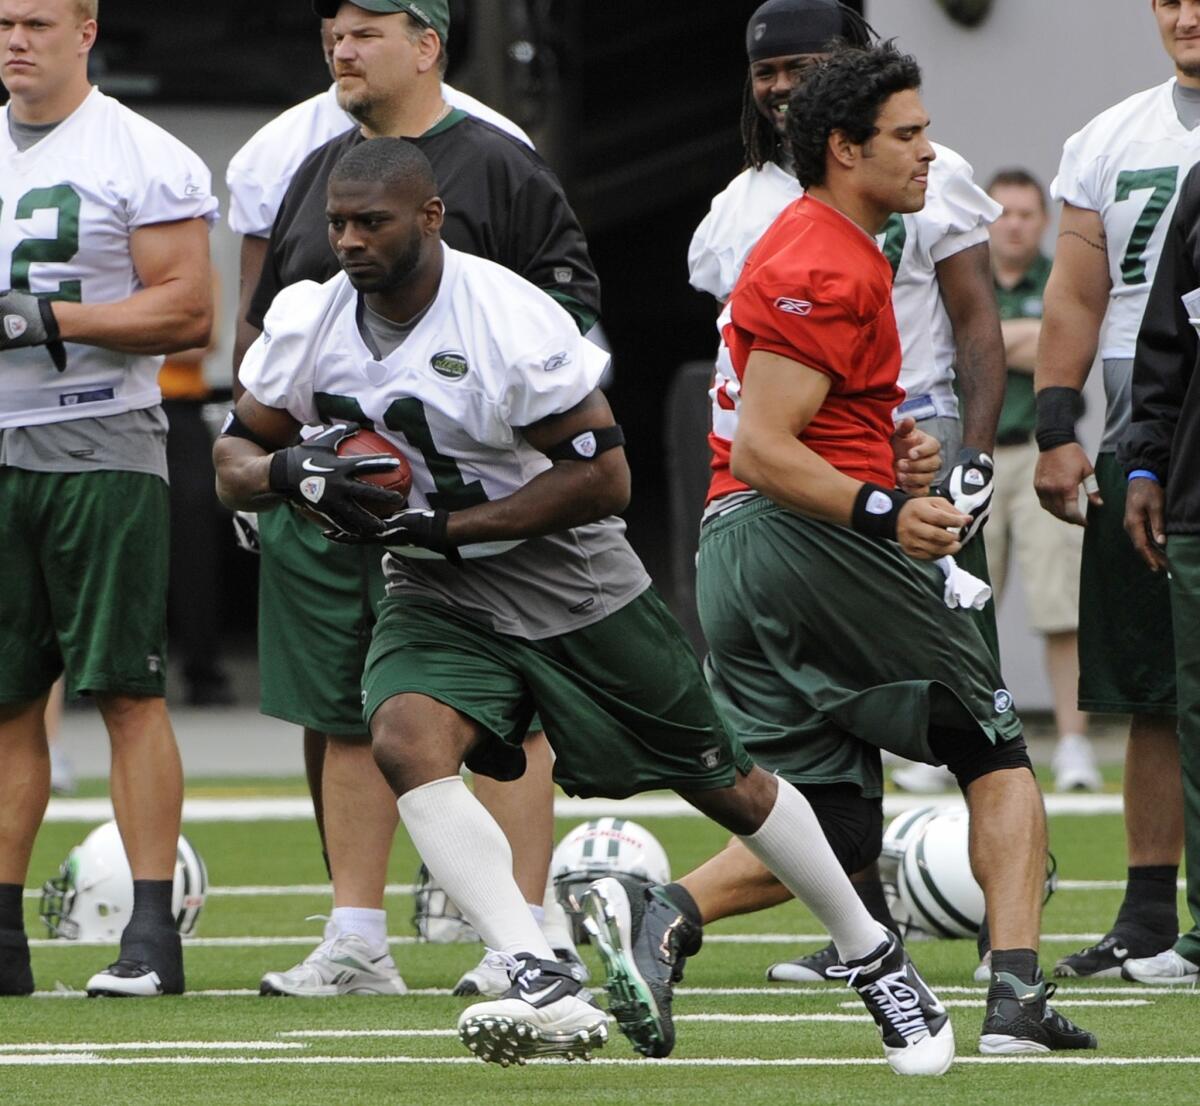 LaDainian Tomlinson takes a handoff from Mark Sanchez during New York Jets training camp back in 2010.